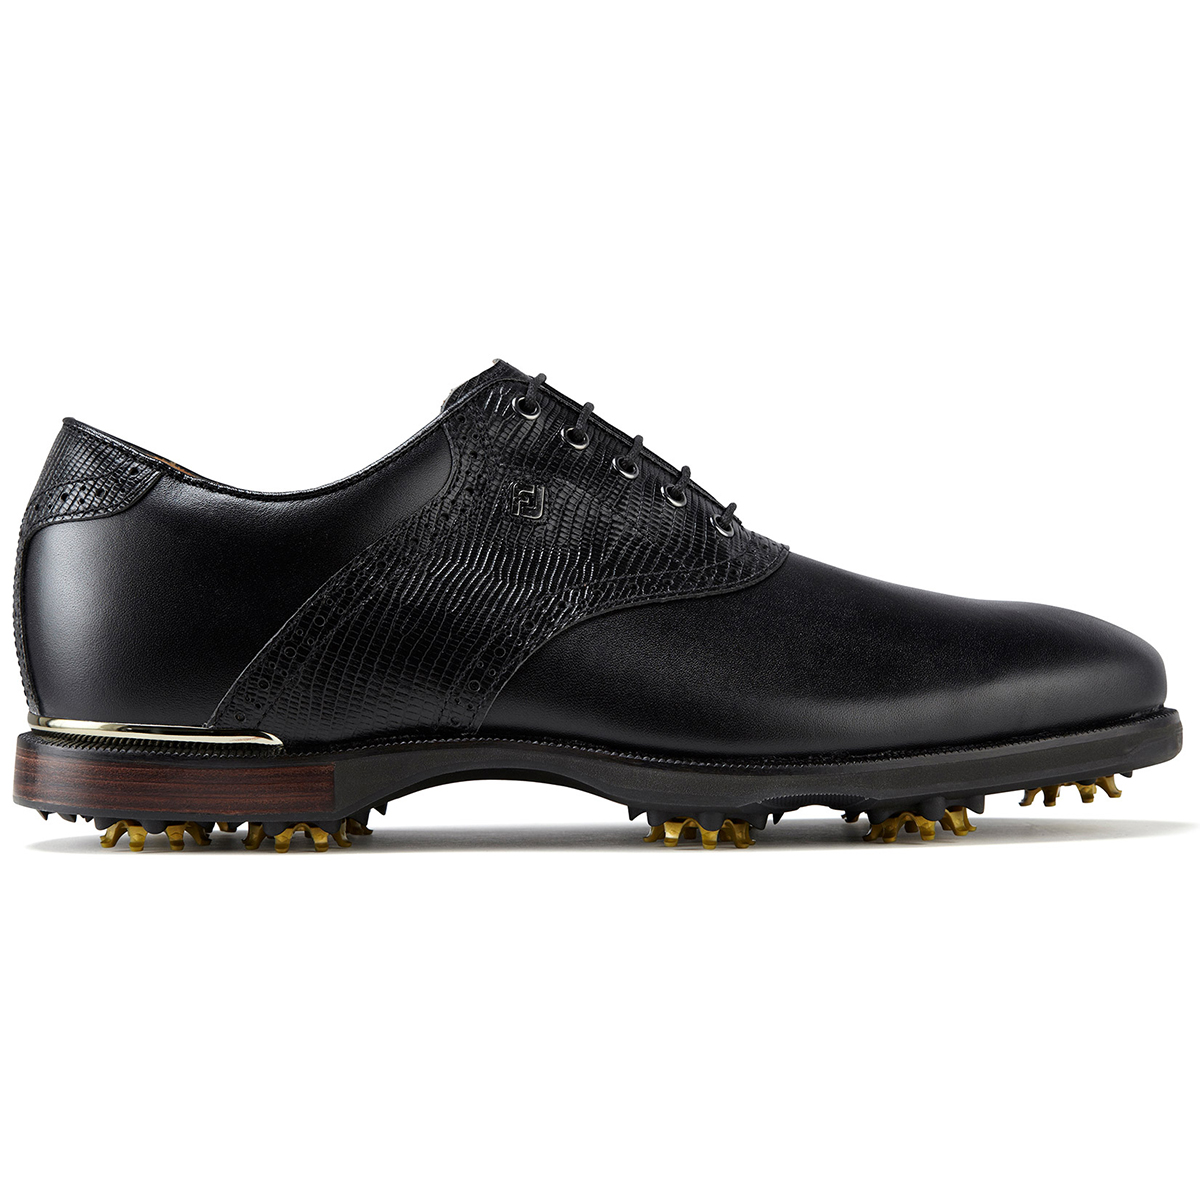 footjoy icon shoes on sale